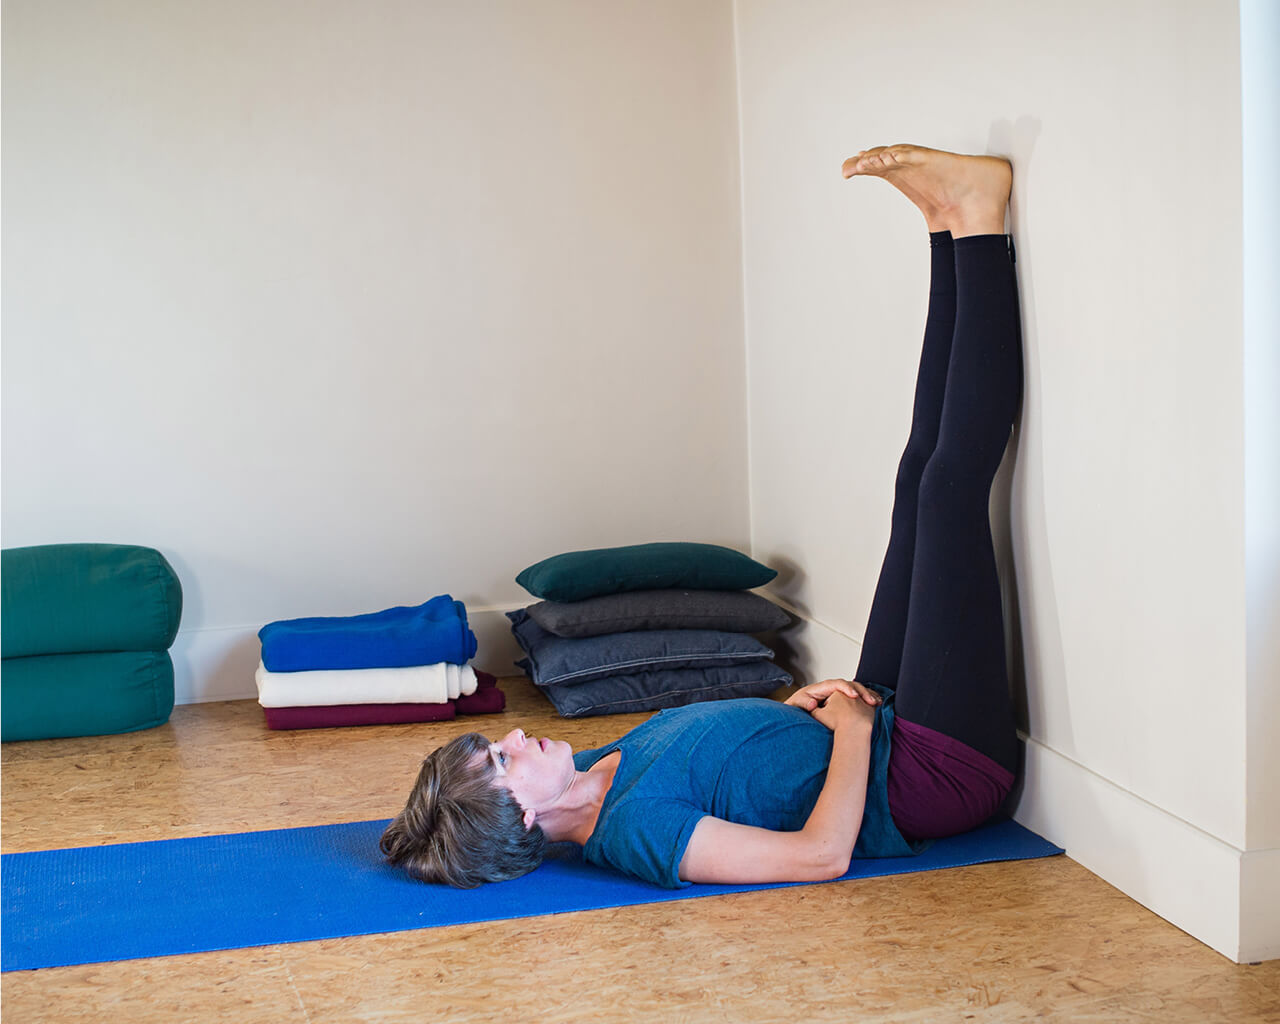 Jessica Hatchet lying on a yoga mat on the floor with her legs up against a wall